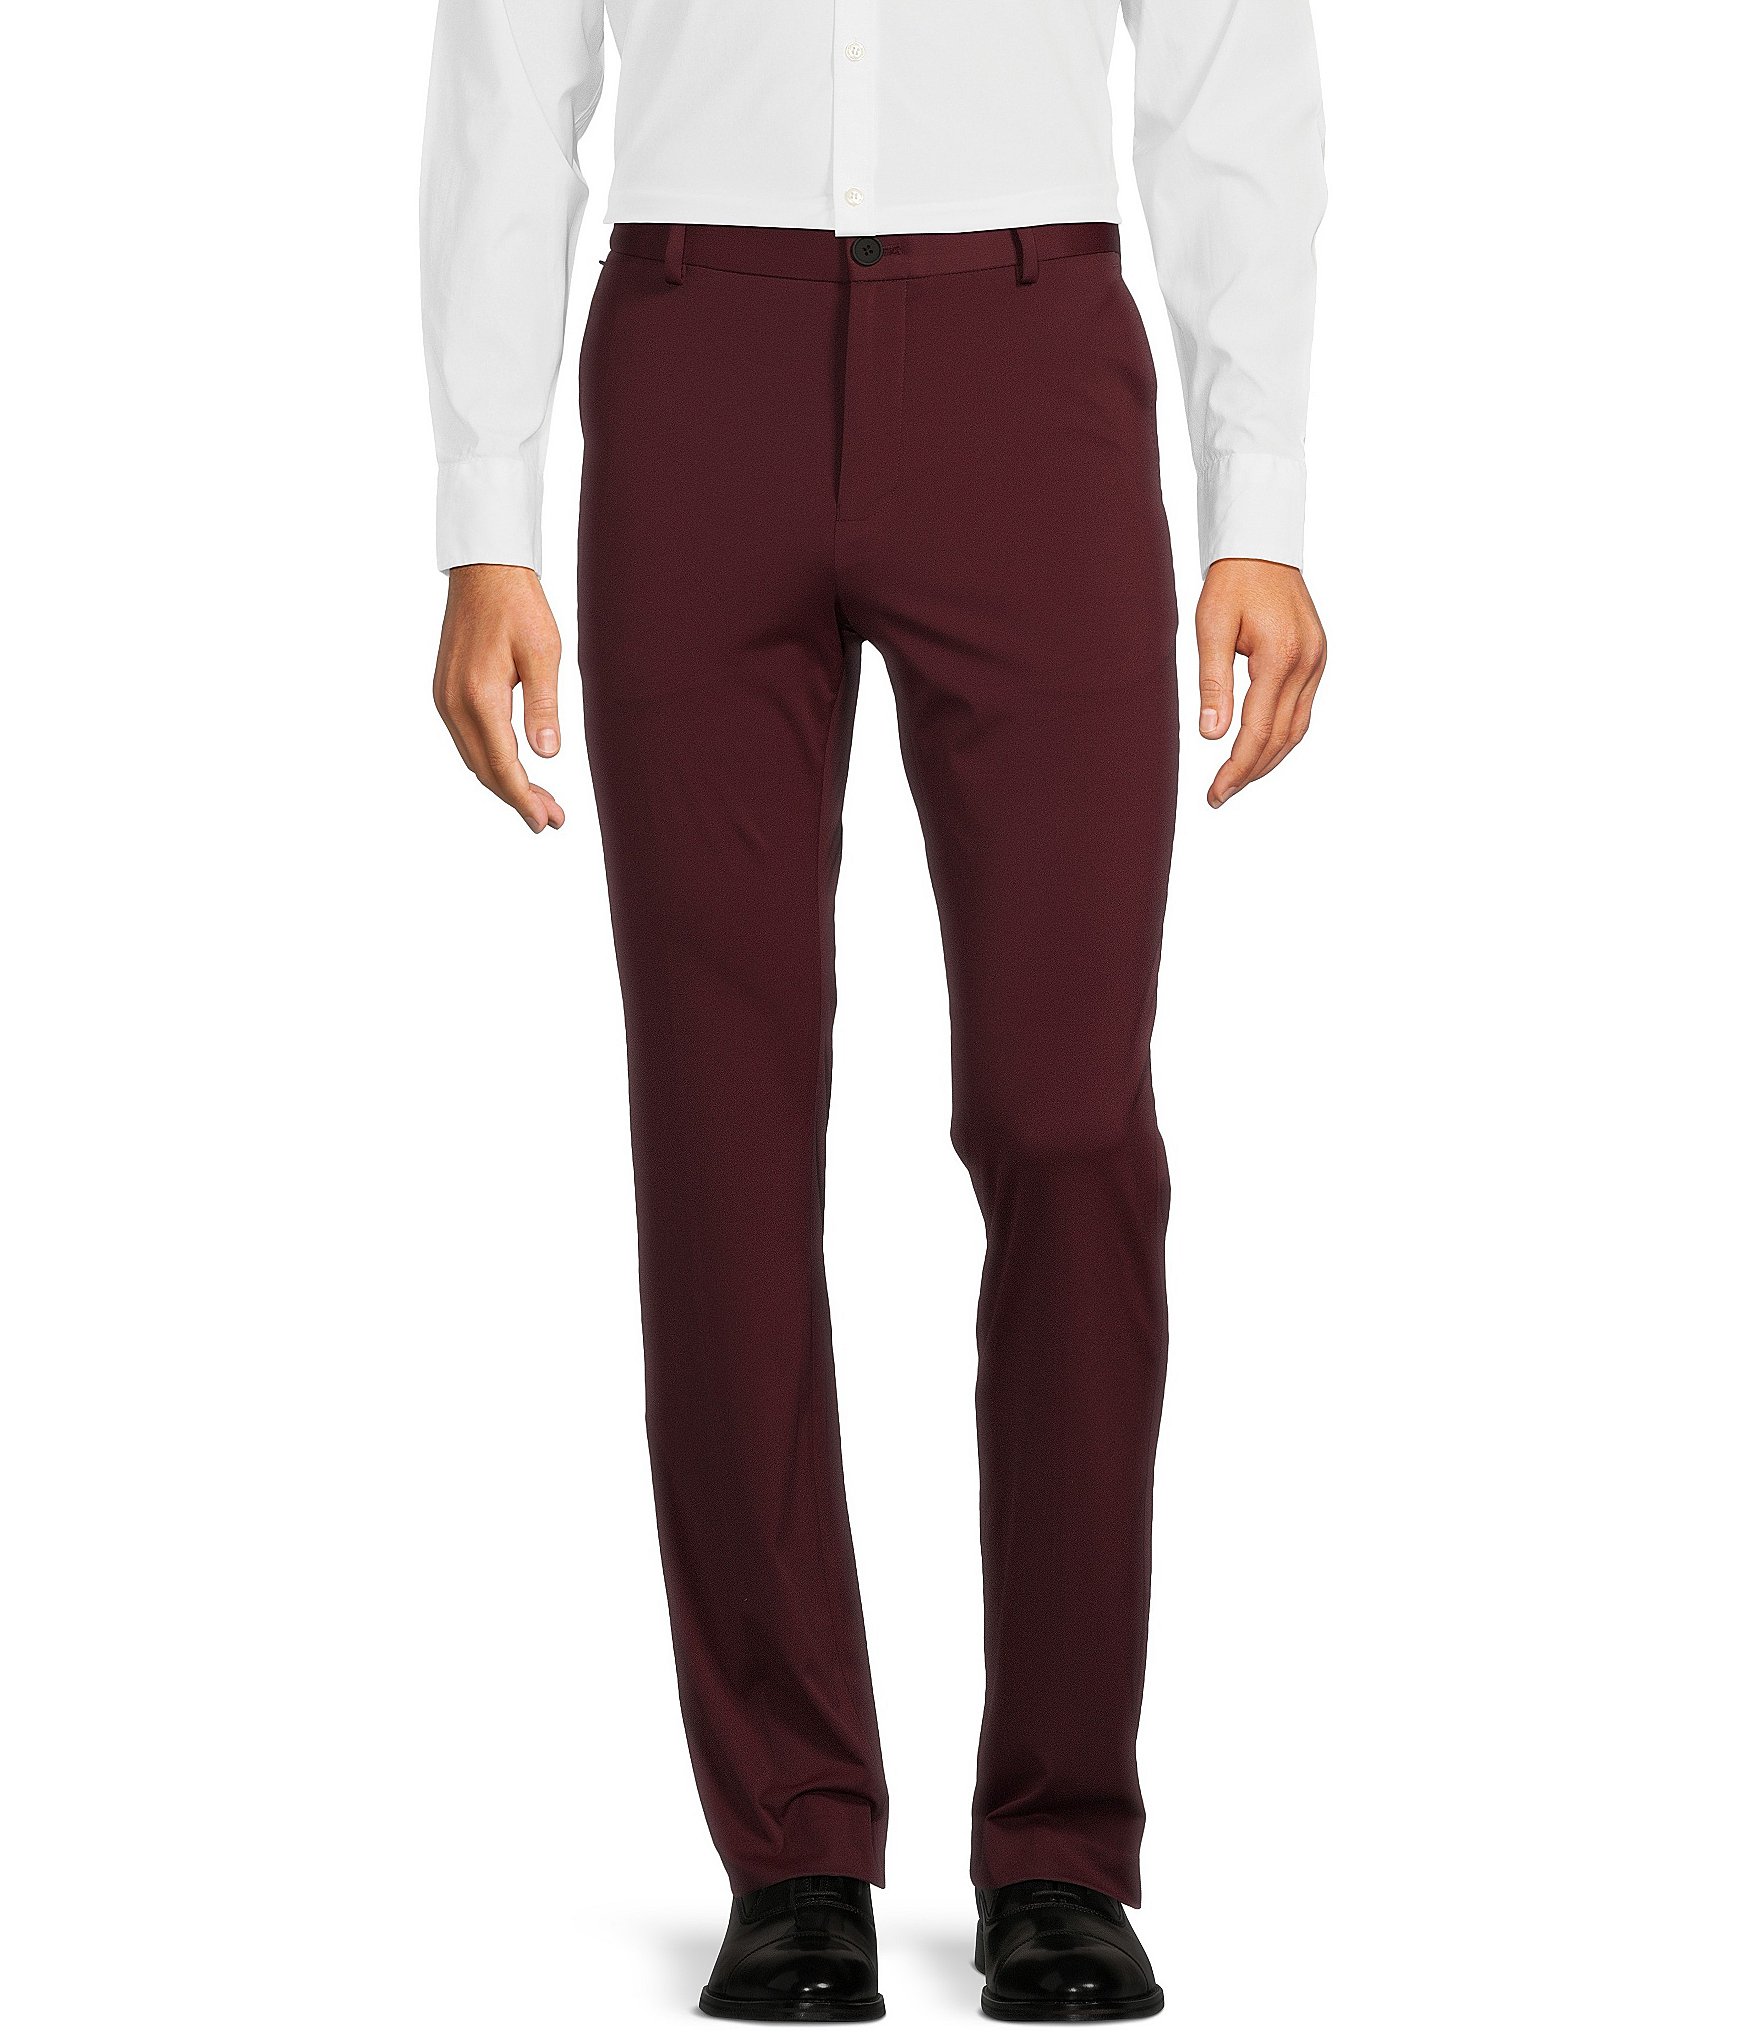 What Colors Go Best With Maroon Pants? (Fashion 2023)